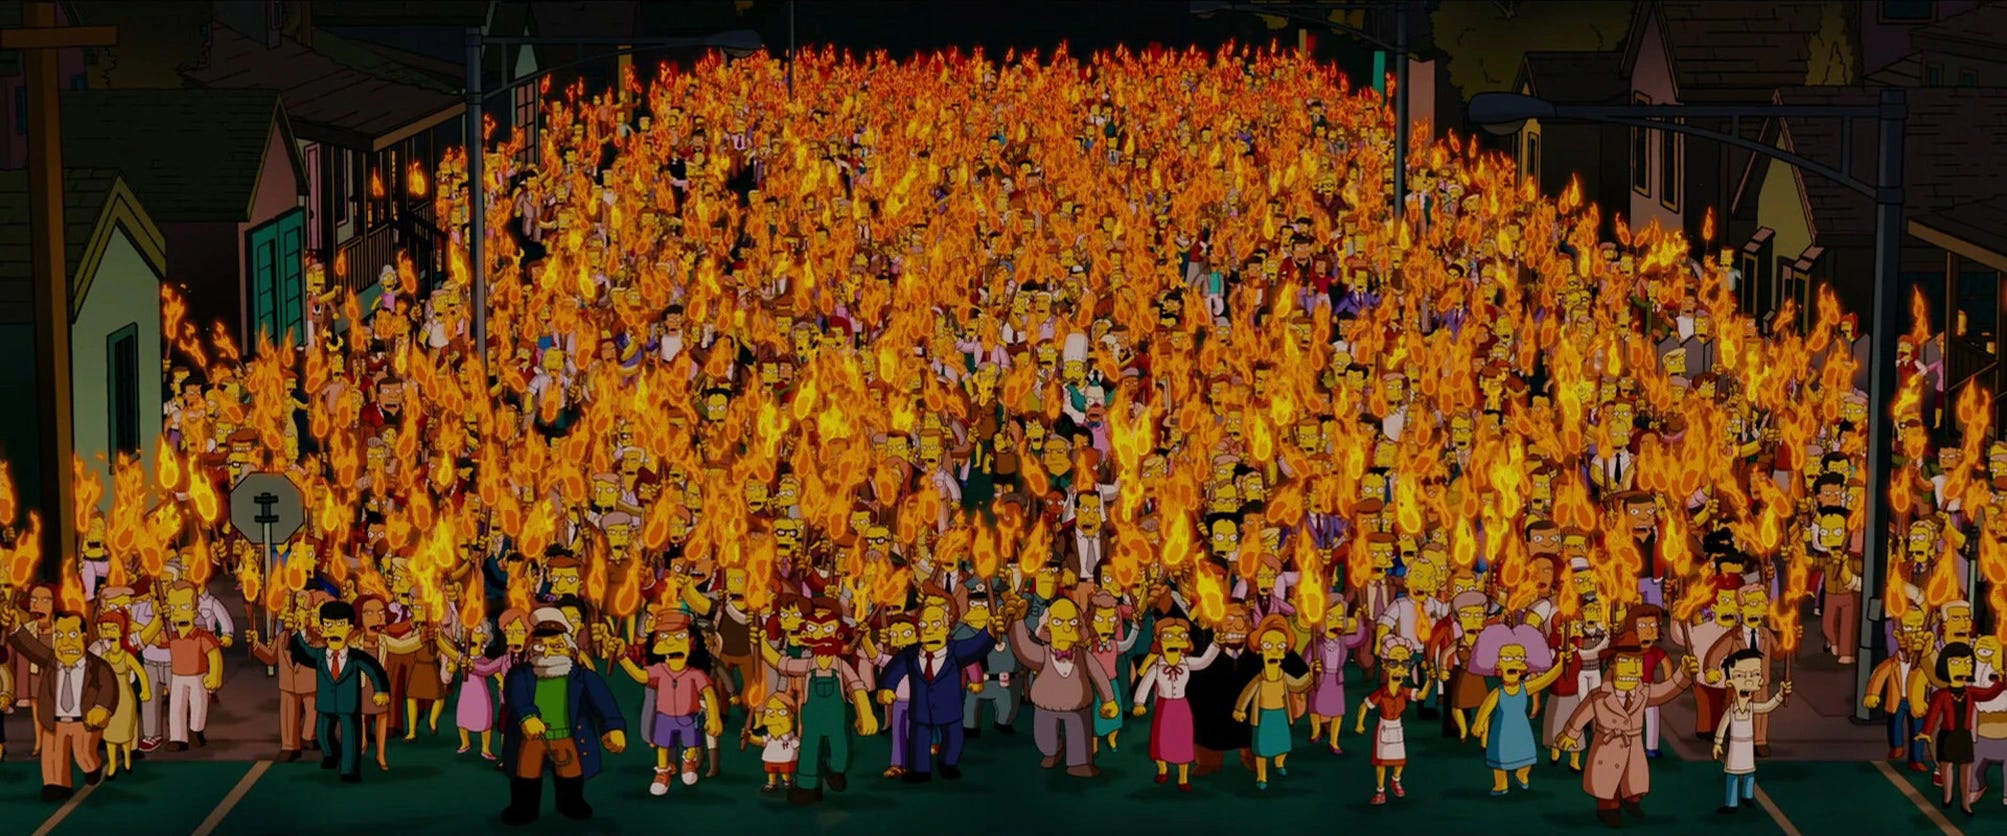 All of the characters from The Simpson, marching in protest carrying torches